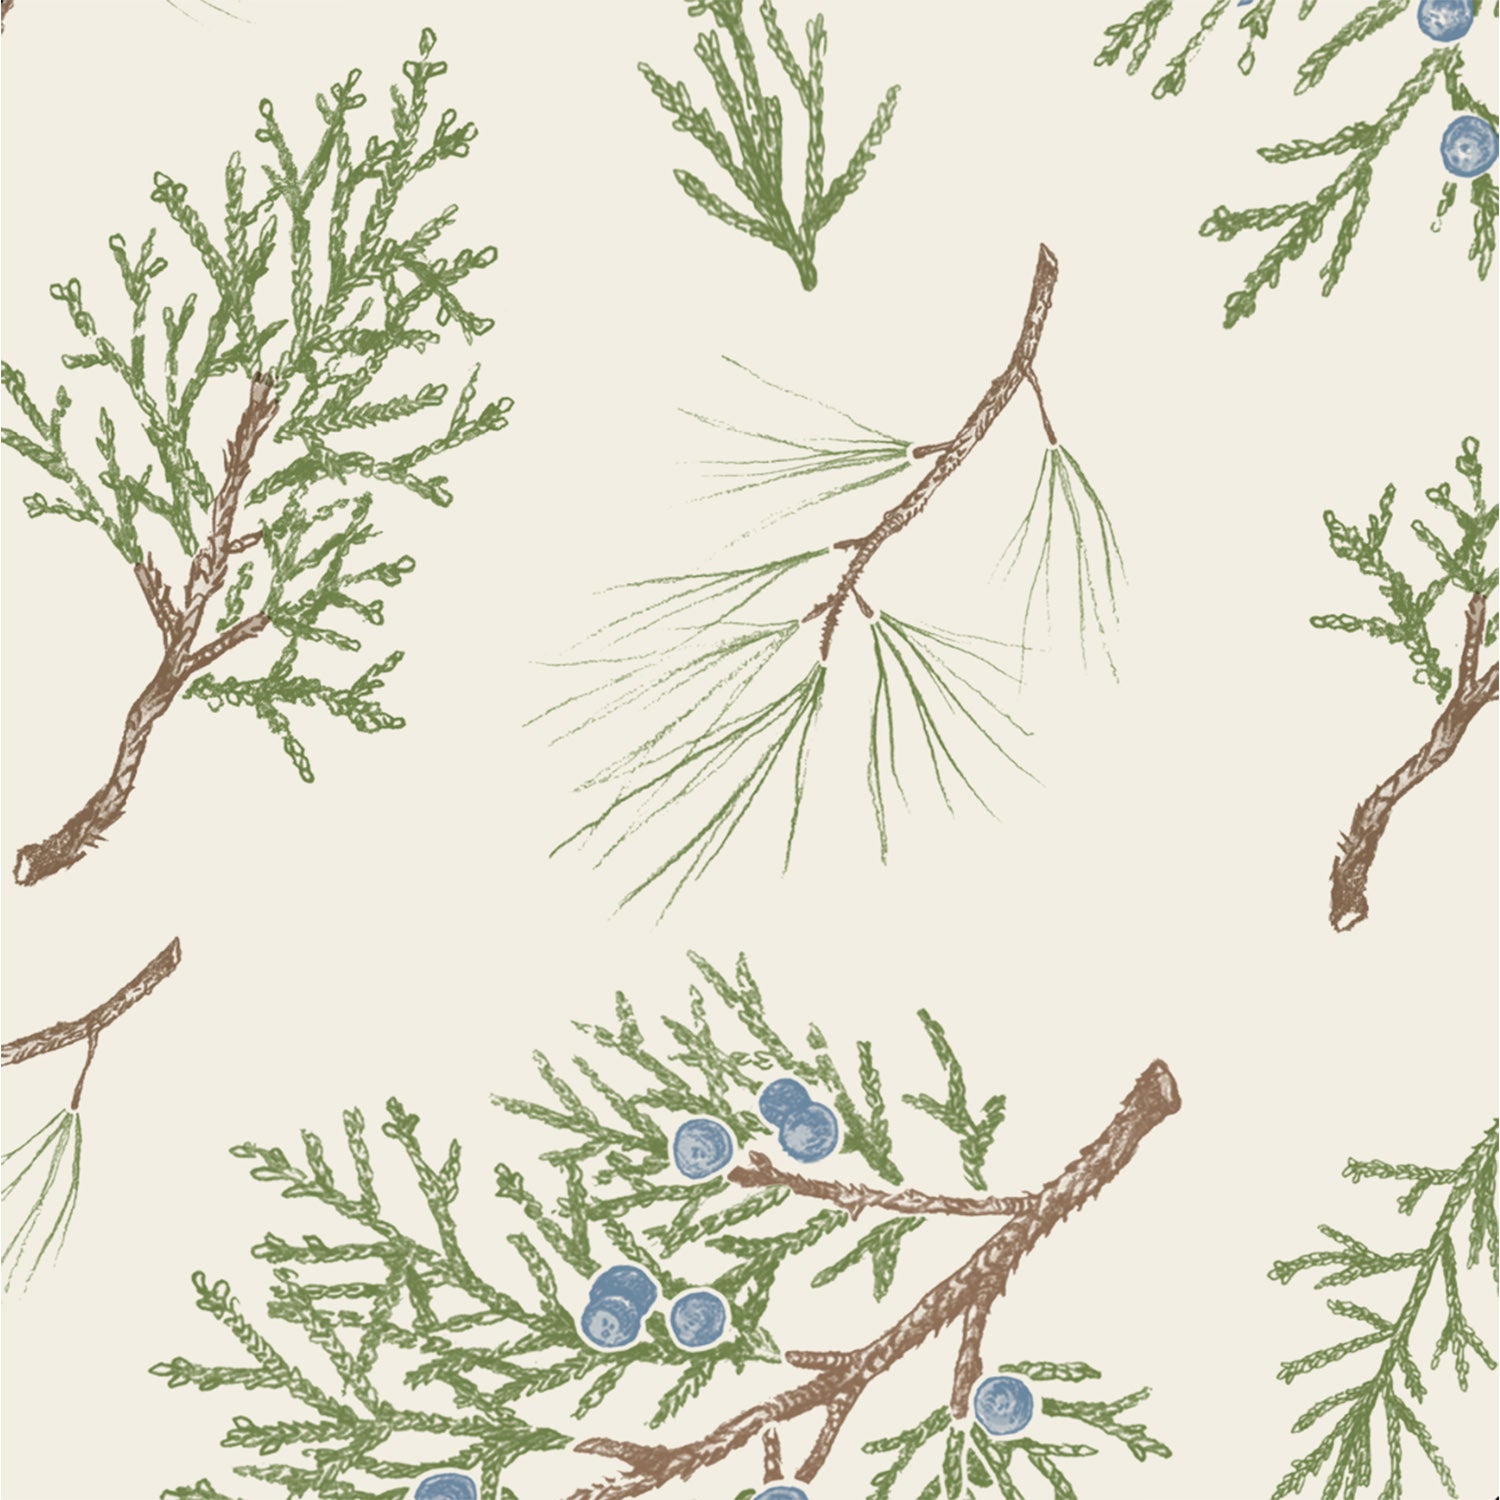 A square cocktail napkin featuring an illustrated scatter of green and brown juniper and pine sprigs with small blue berries, over a white background.